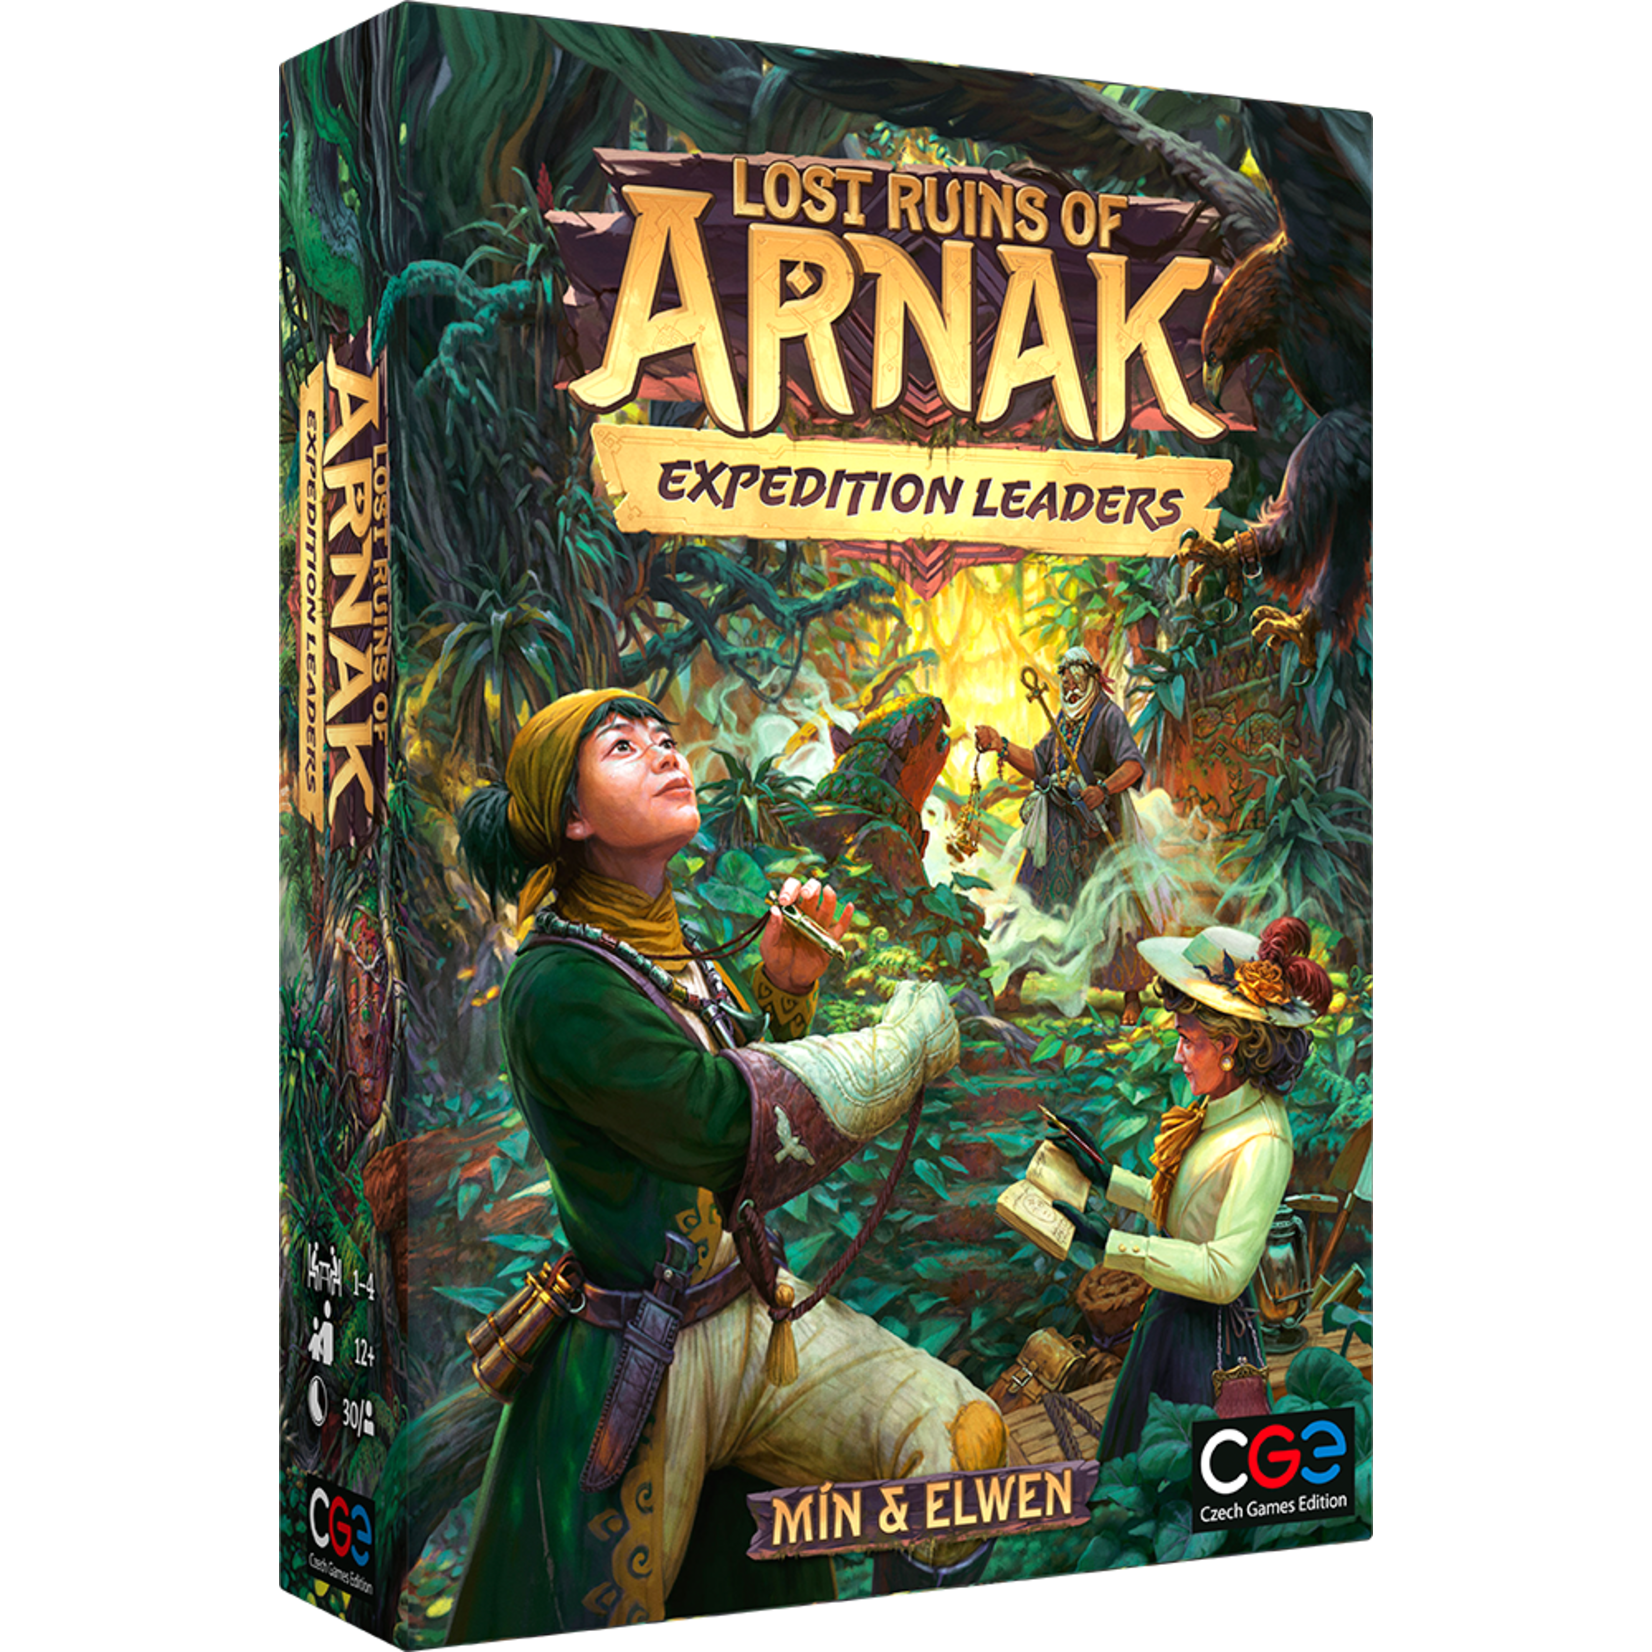 Czech Games Edition Lost Ruins of Arnak: Expedition Leaders (Expansion)